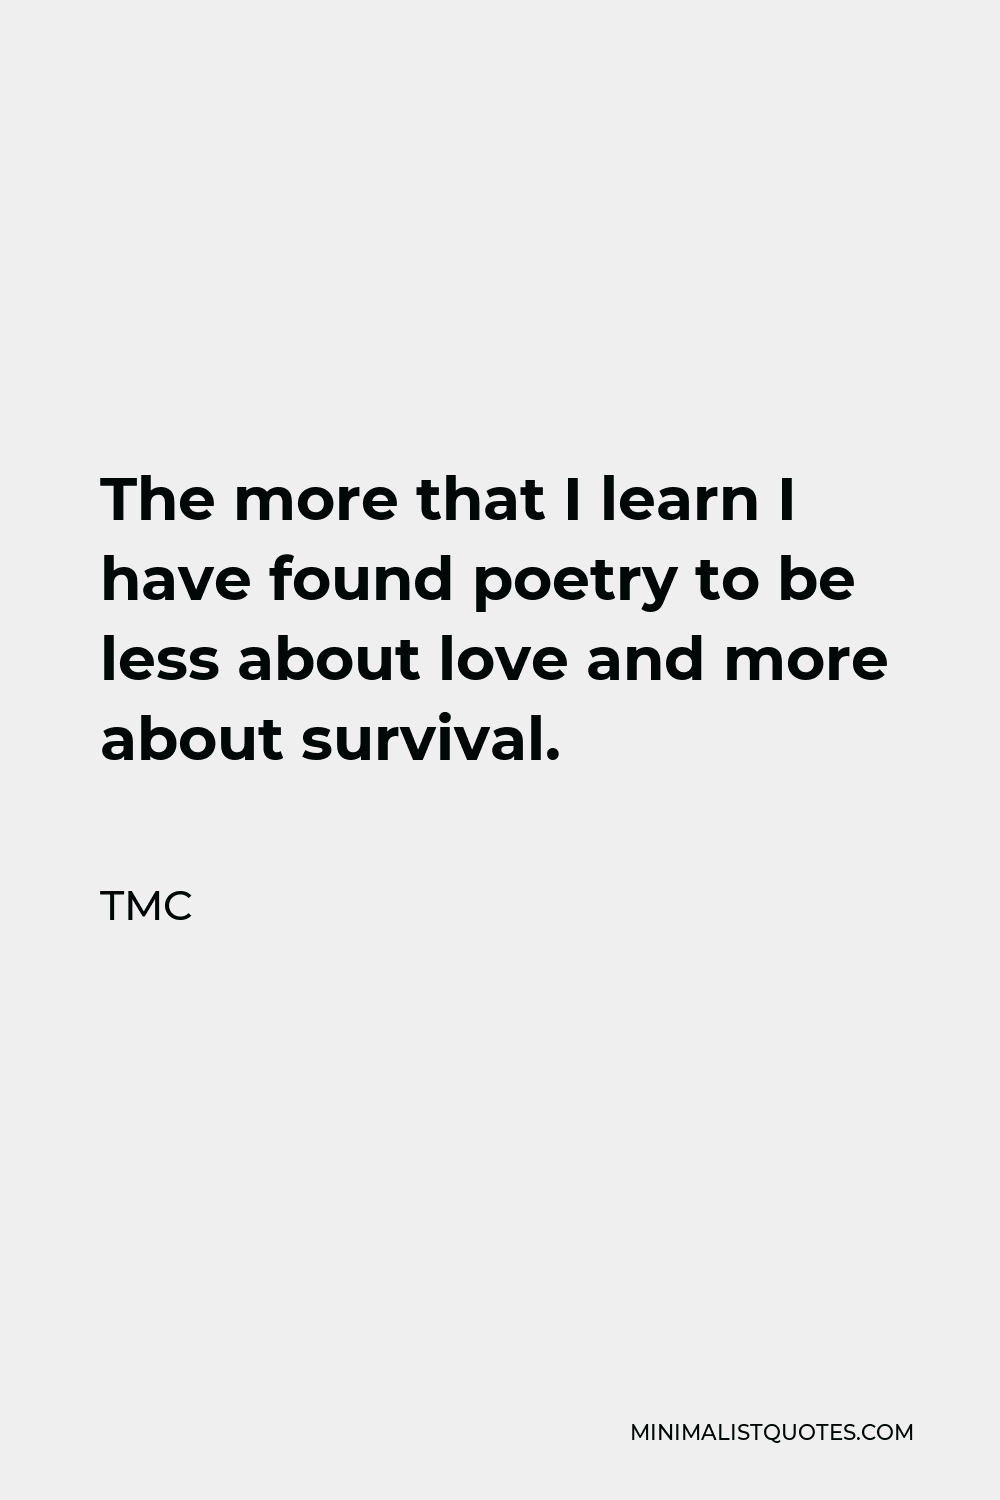 TMC Quote - The more that I learn I have found poetry to be less about love and more about survival.